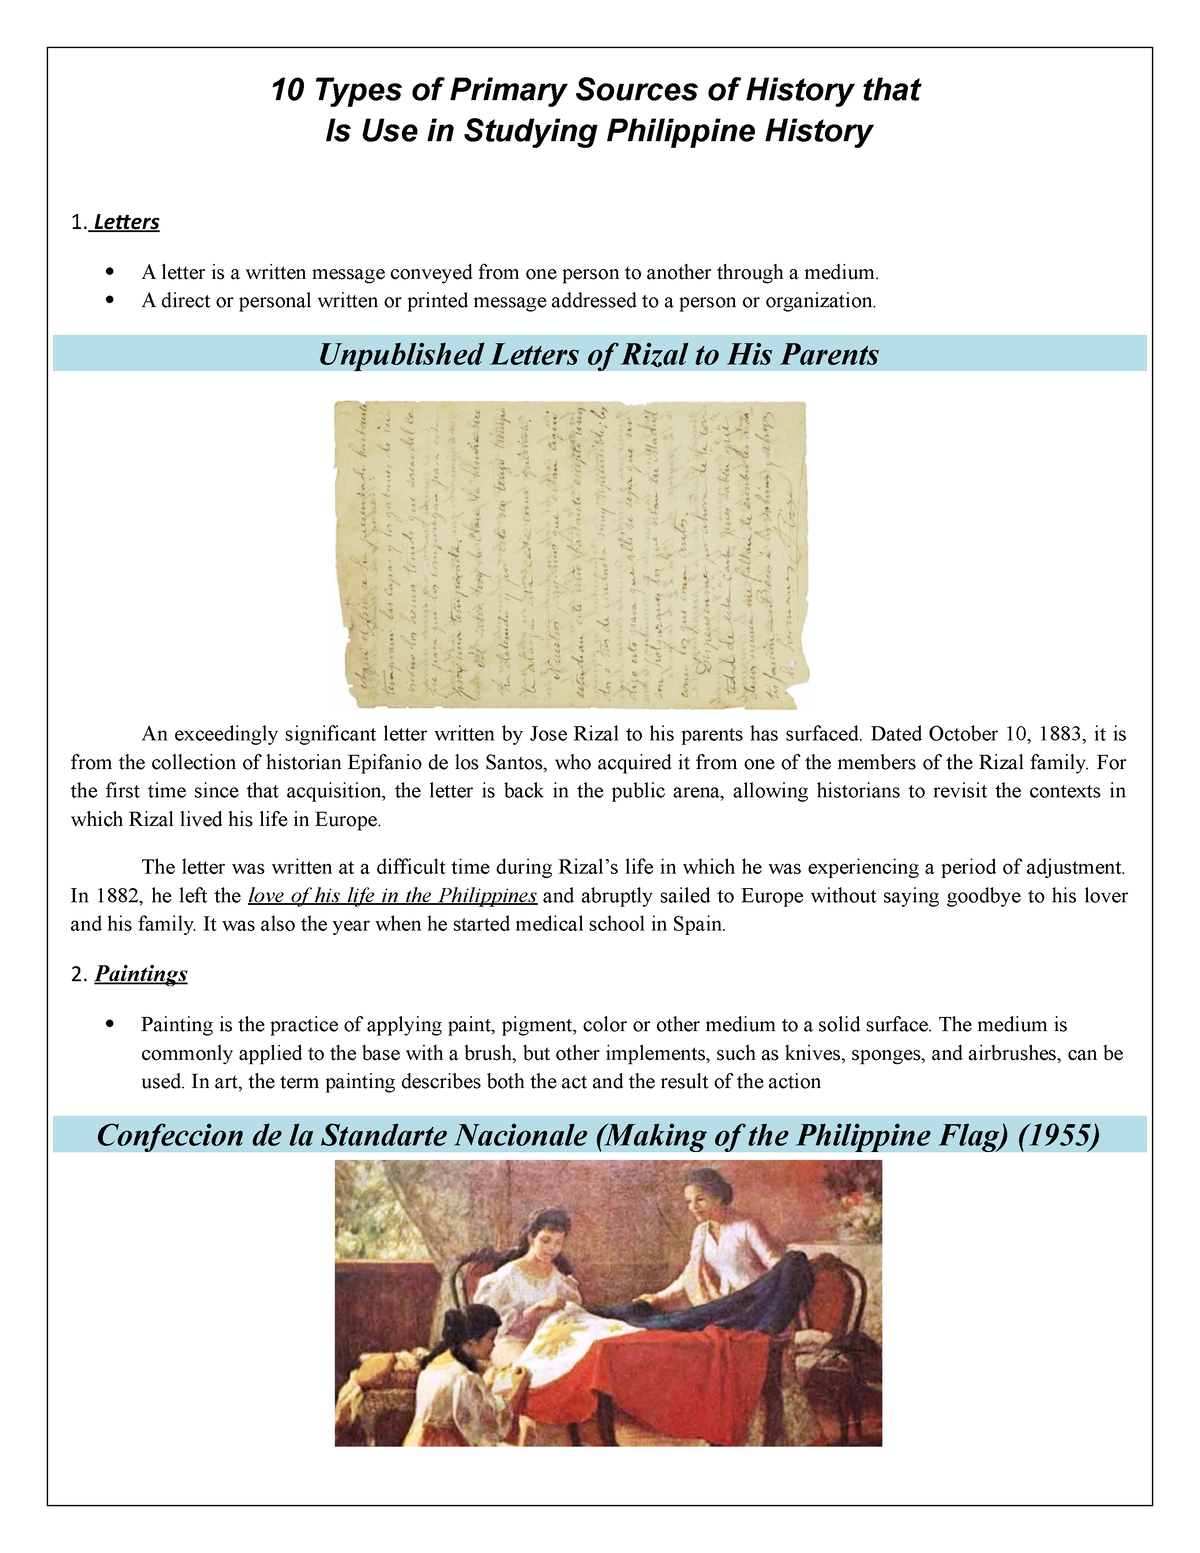 History 1 - Edited - 10 Types of Primary Sources of History that Is Use ...